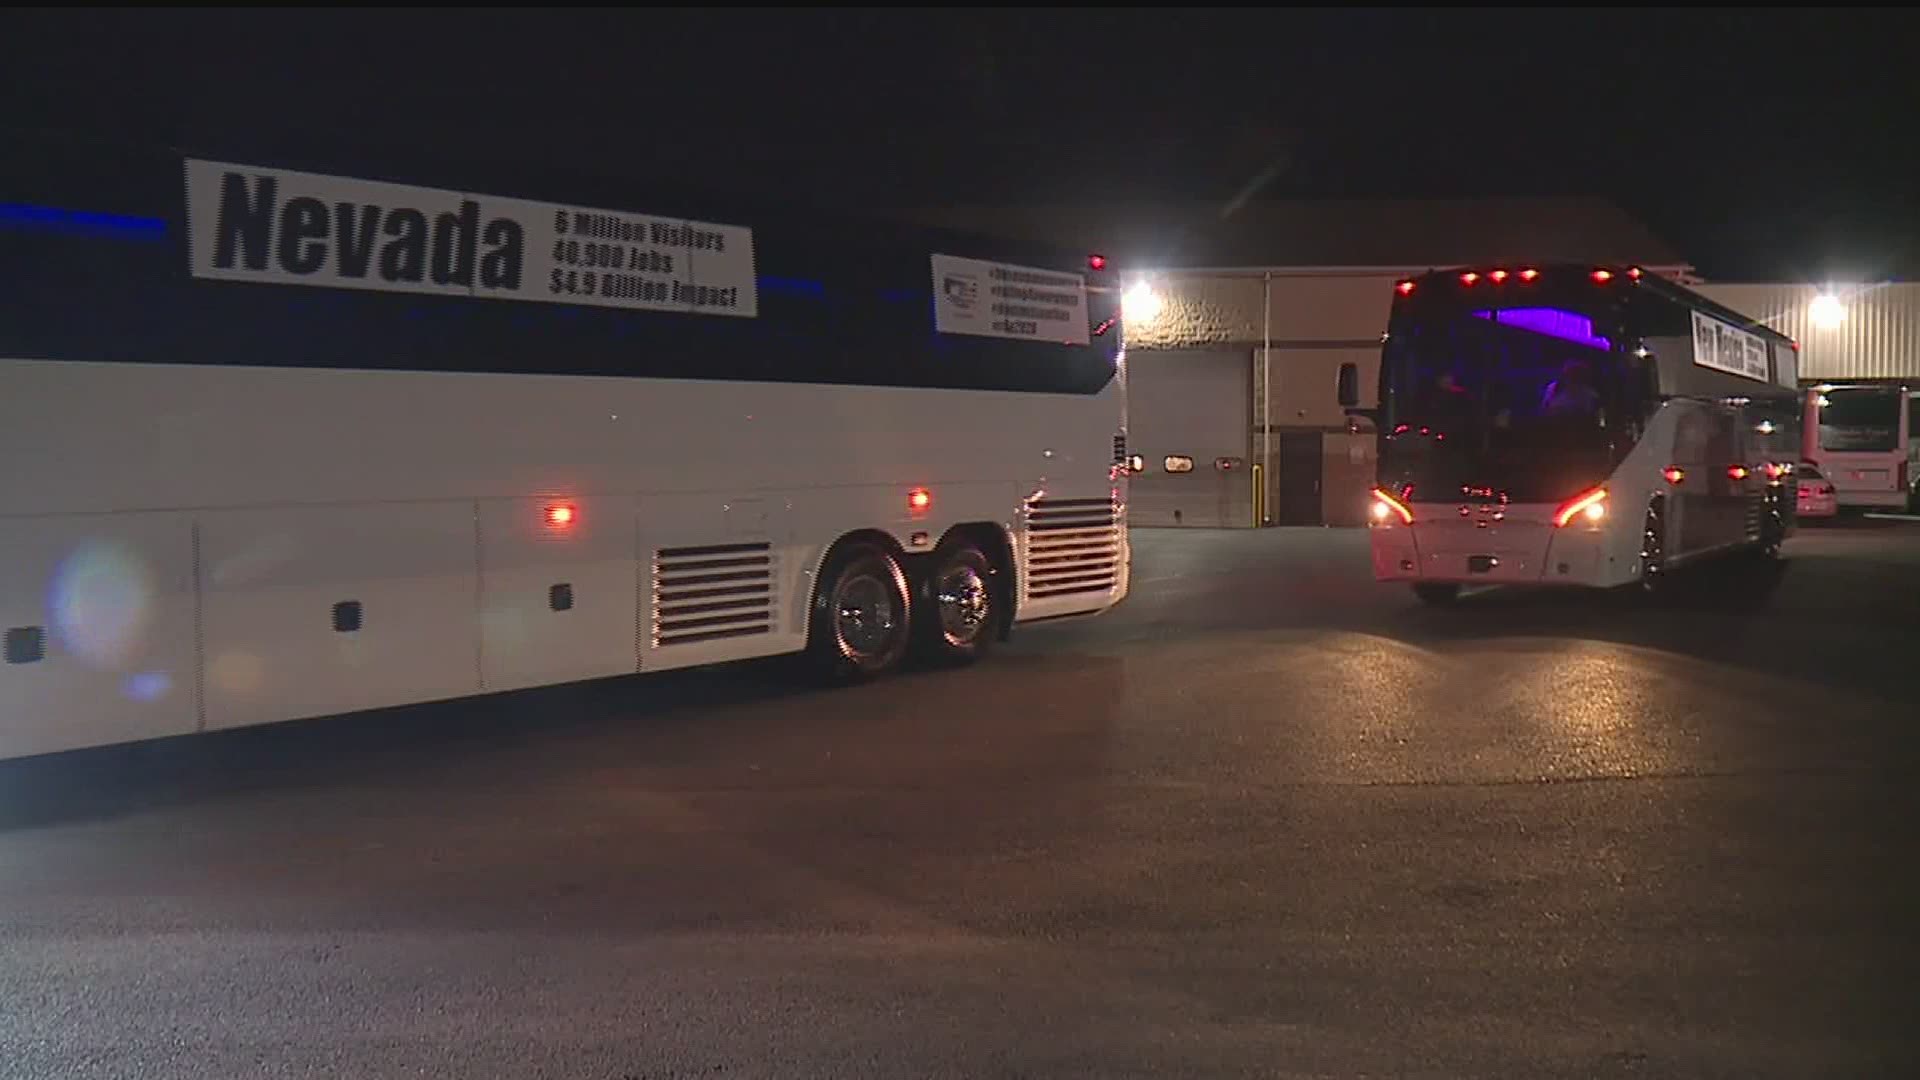 Bus drivers across the country, including here in Pennsylvania, are on their way to our nation's capitol as part of the Motorcoaches Rolling for Awareness rally.